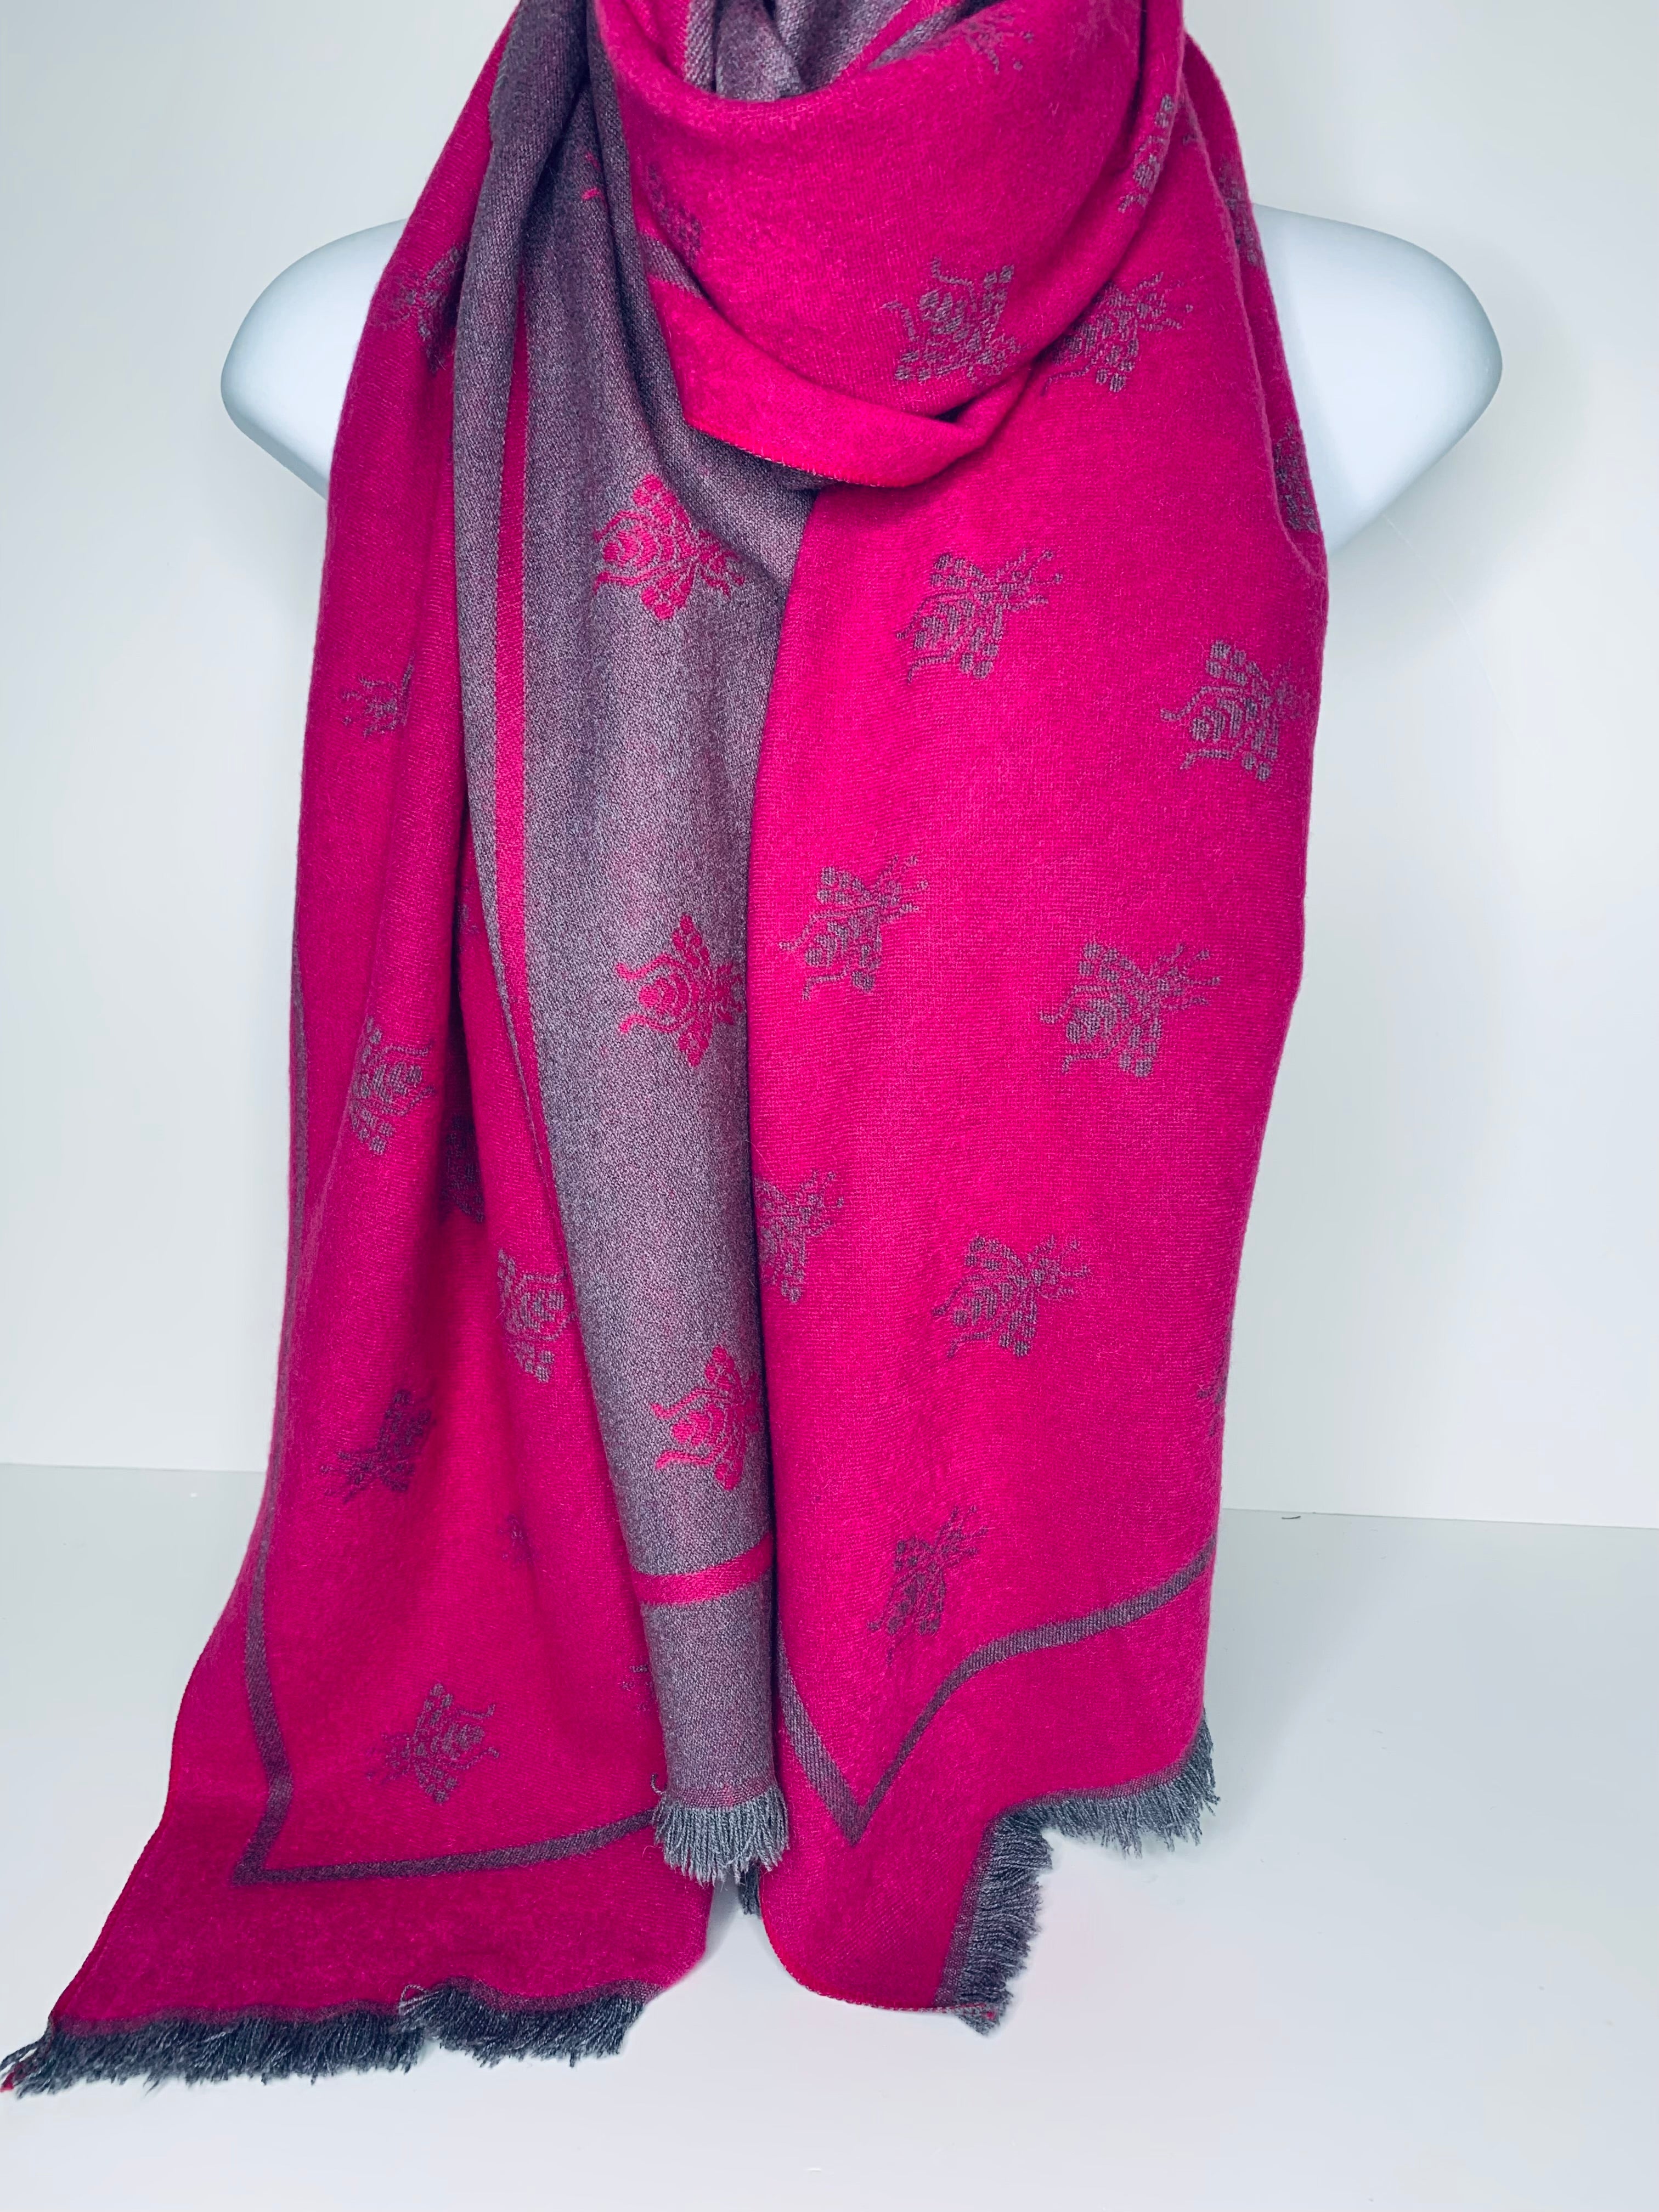 Reversible, cashmere blend bee print scarf in hot pink and grey